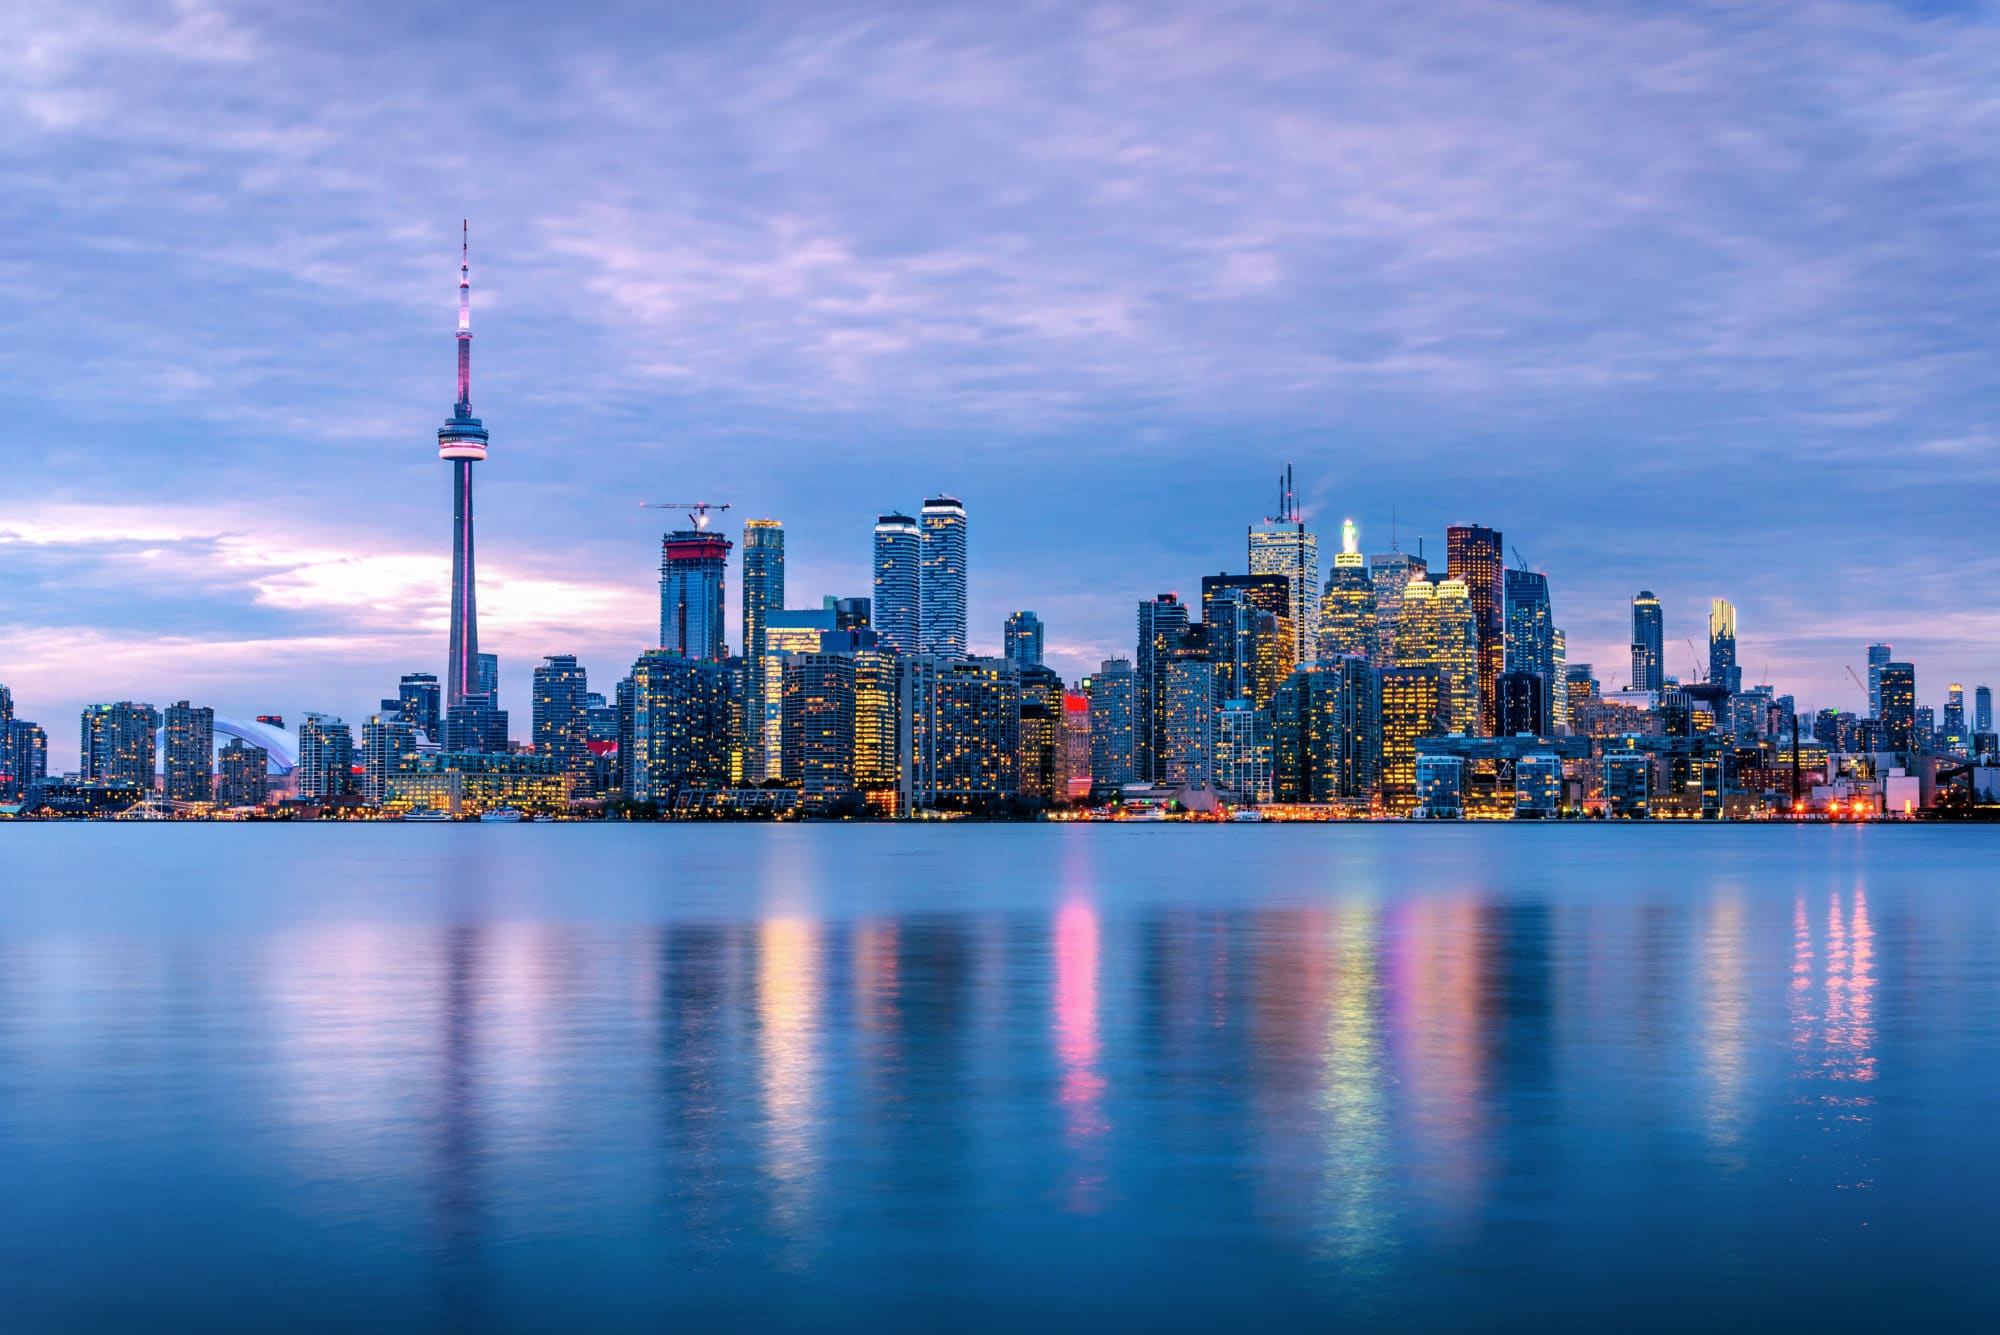 Spectacular View of Downtown Toronto under Cloudy Sky at Dusk with Lights Reflecting in Water. Ontario, Canada.